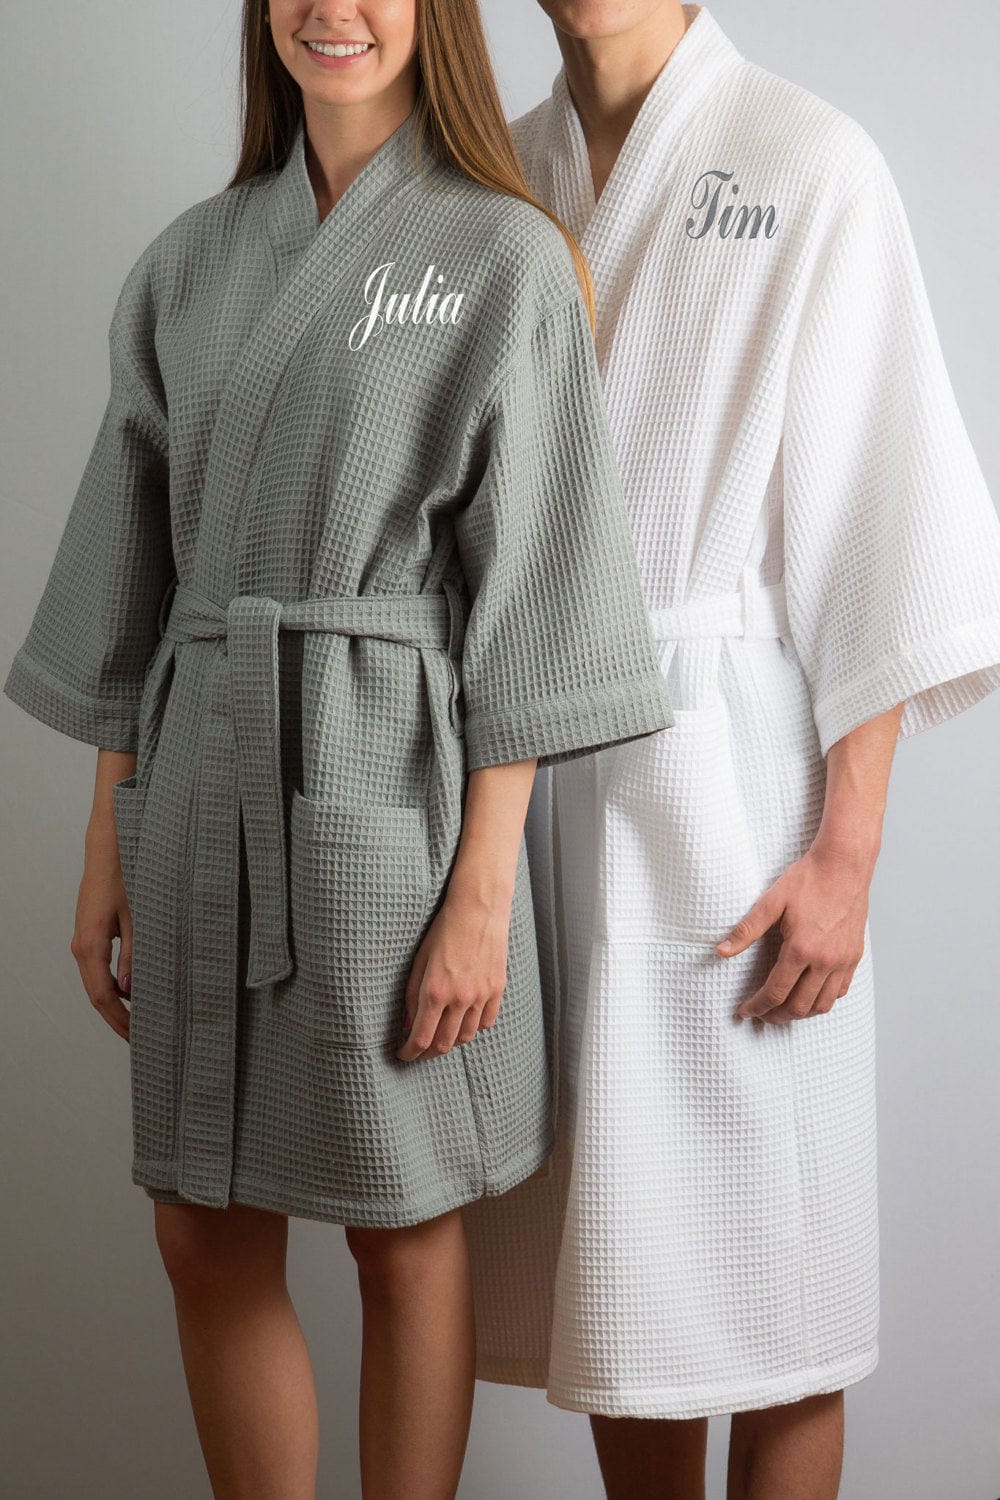 Couples Robes Couples T Of 2 Matching Monogrammed Spa 0759